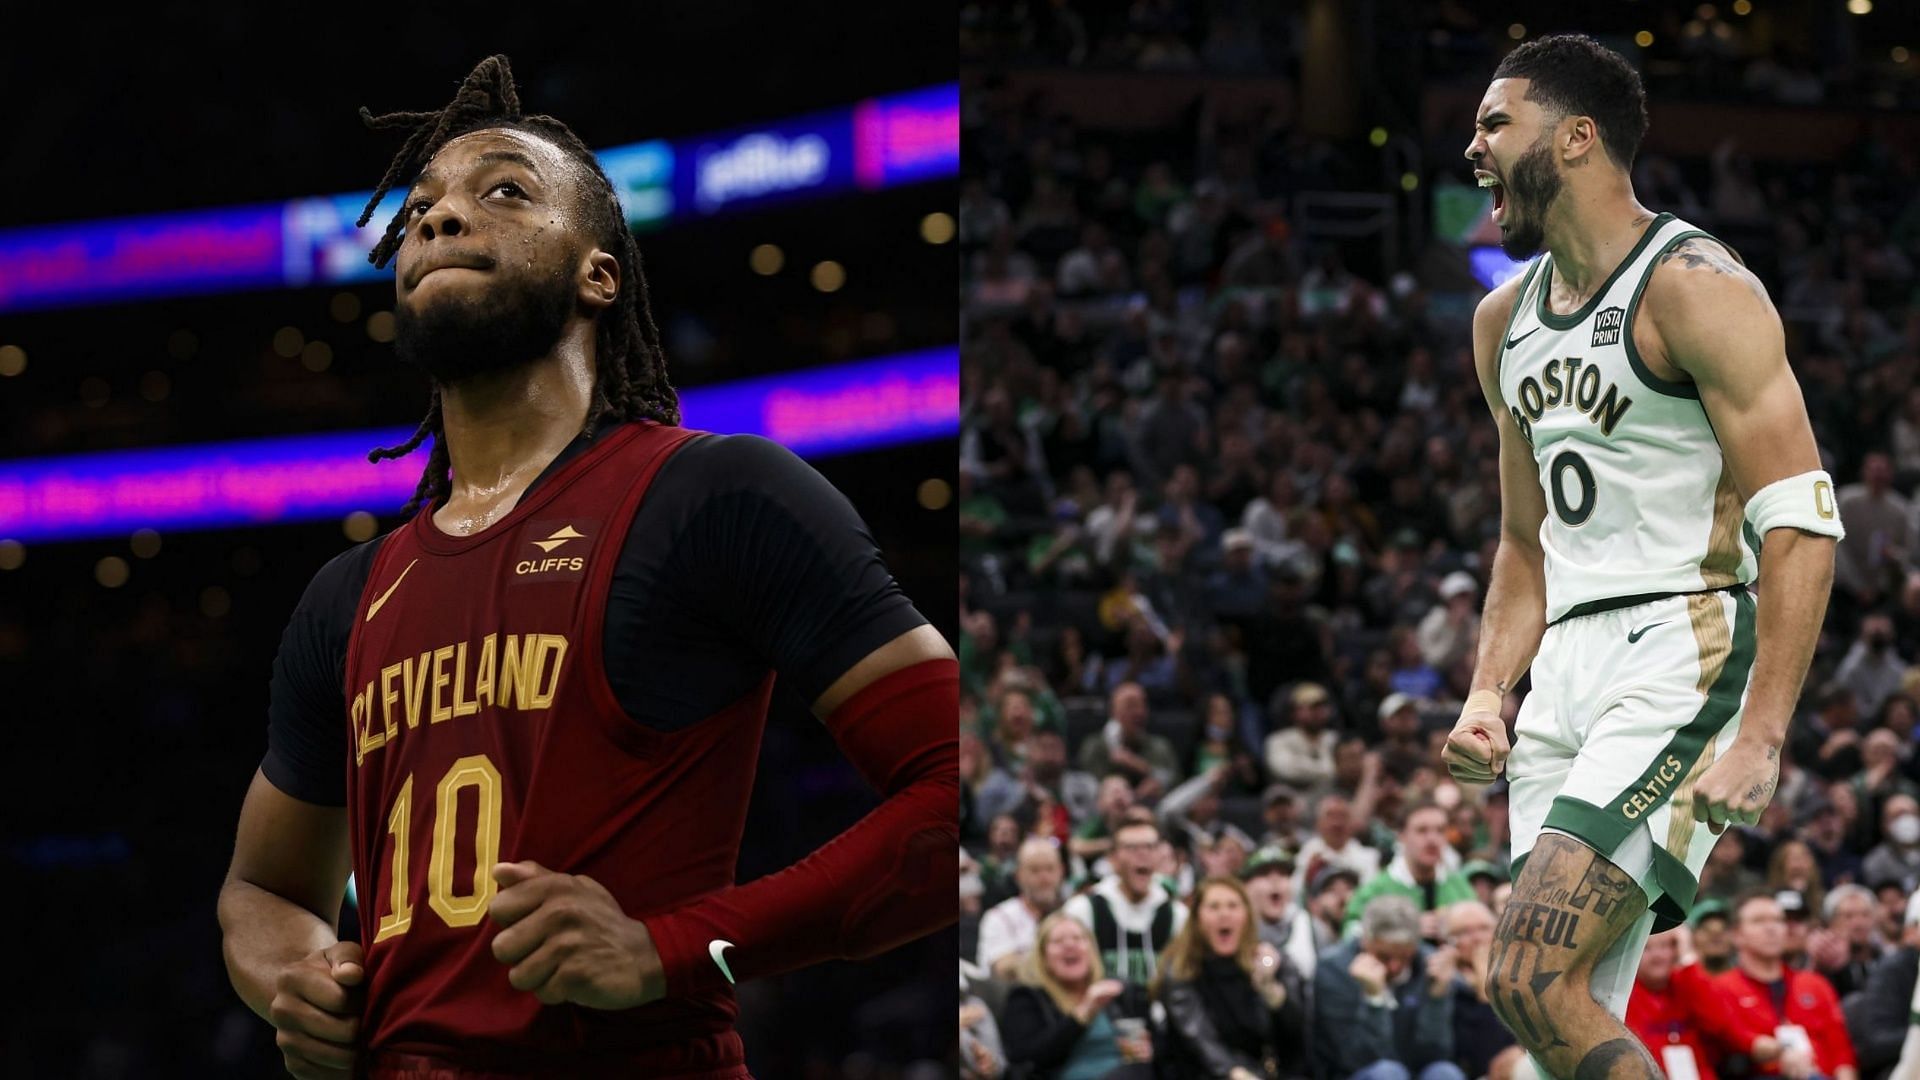 How to watch Cleveland Cavaliers vs Boston Celtics NBA basketball game tonight? TV channel, streaming options &amp; more explored